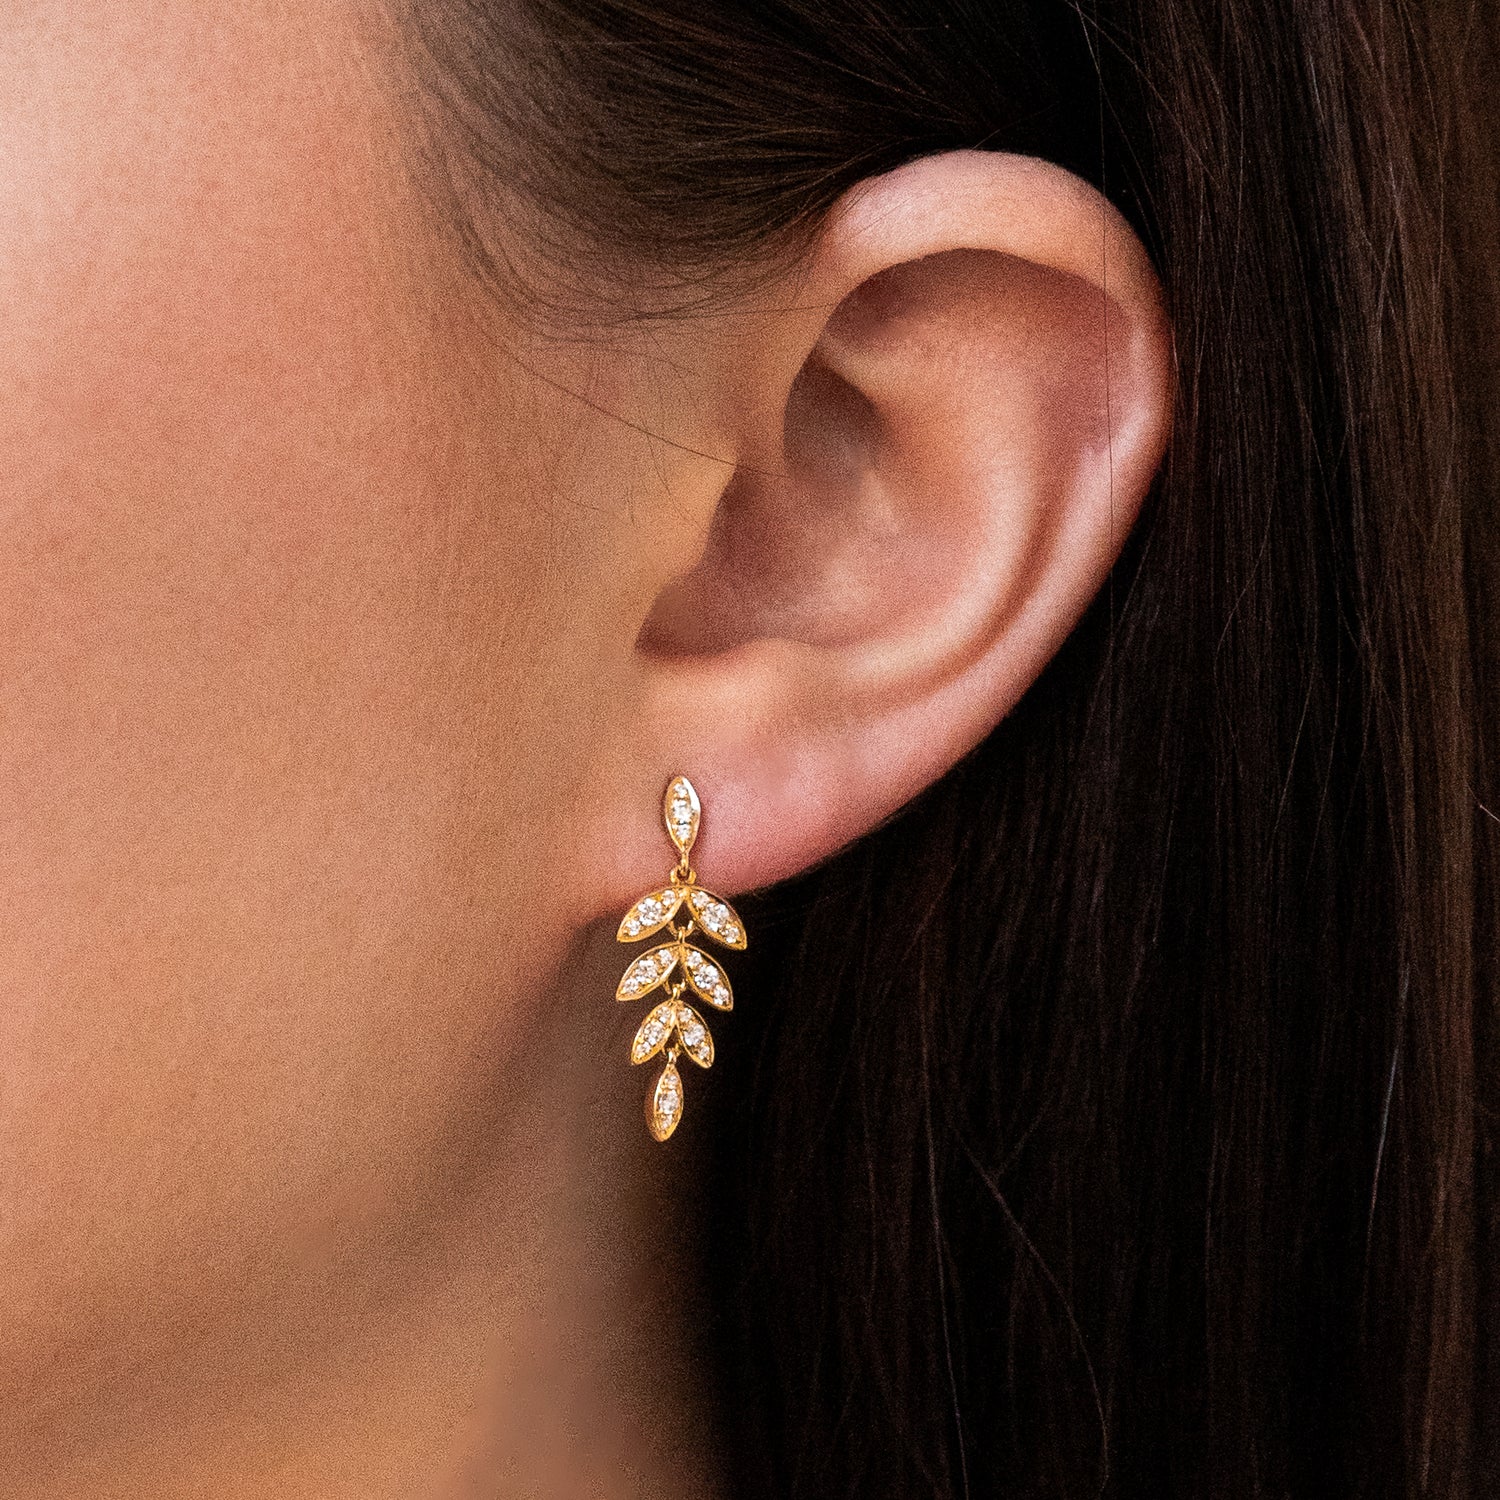 Leaf Style Gold Earrings with Diamonds